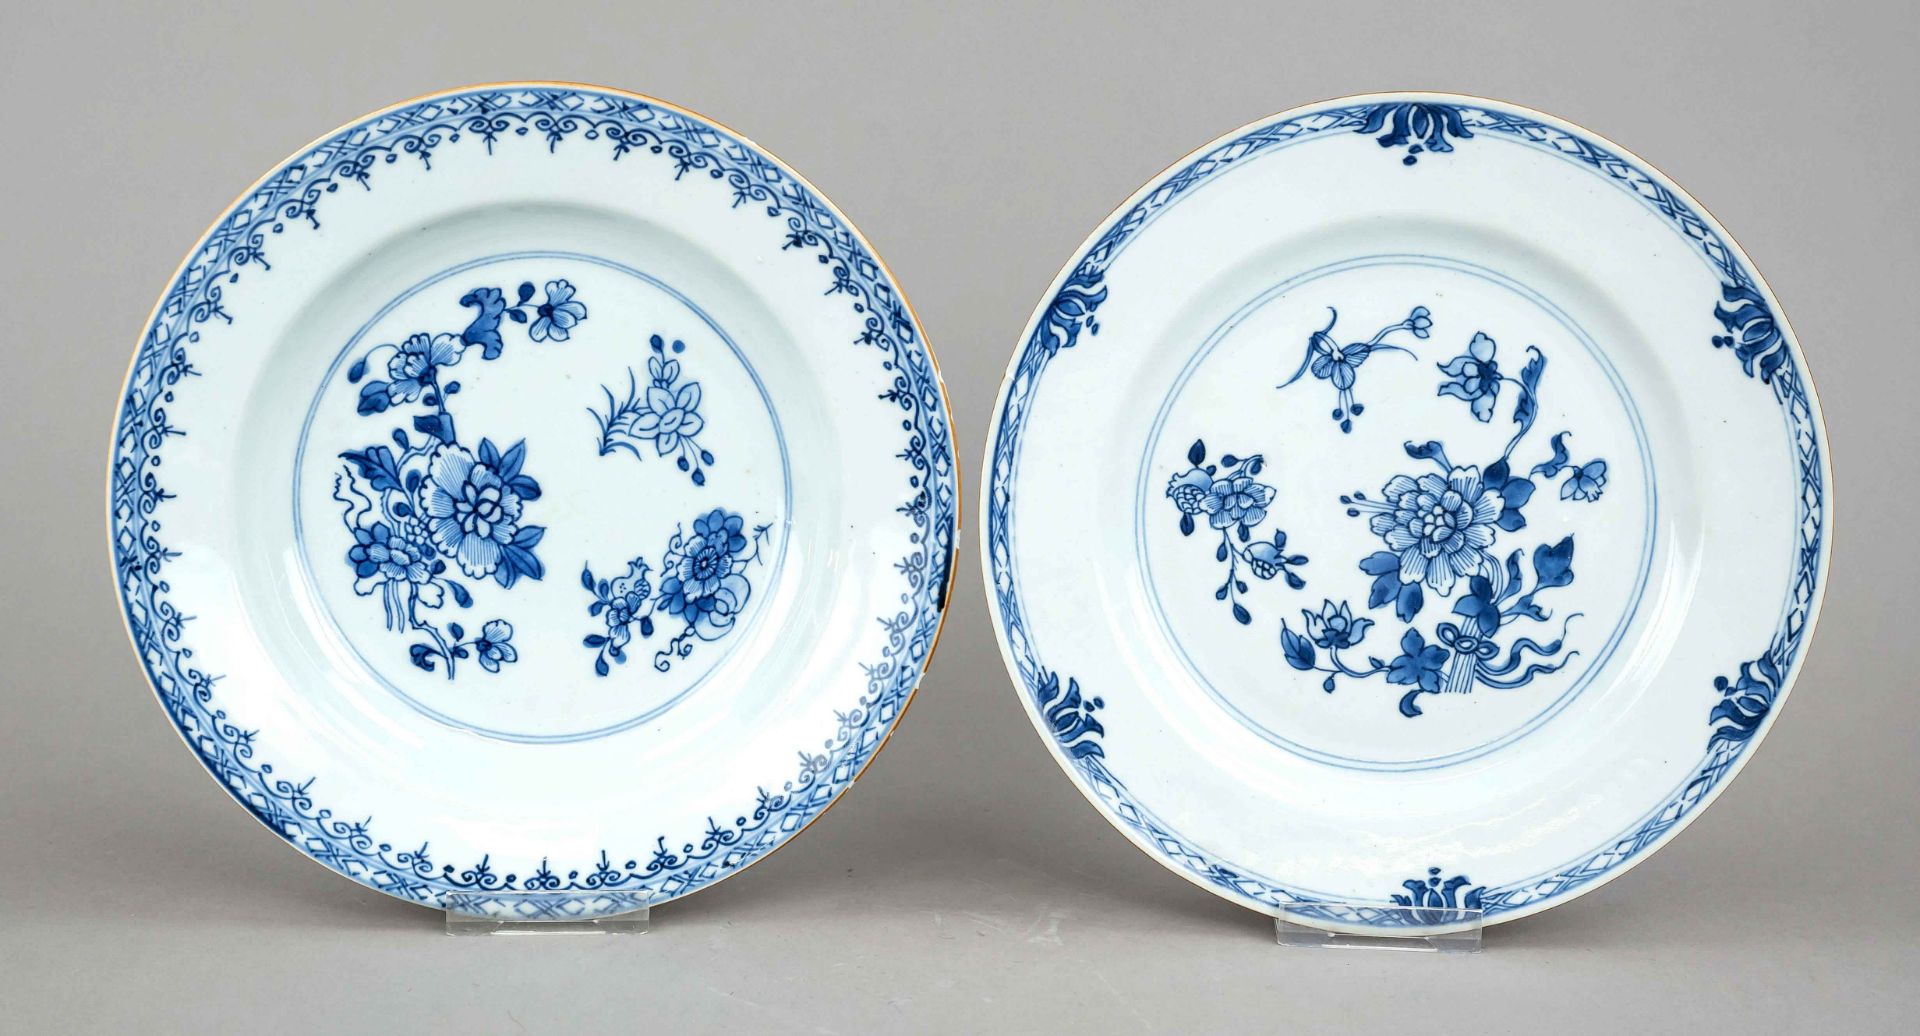 2 export plates, China, Qing dynasty(1644-1911), around 1800, porcelain with cobalt blue